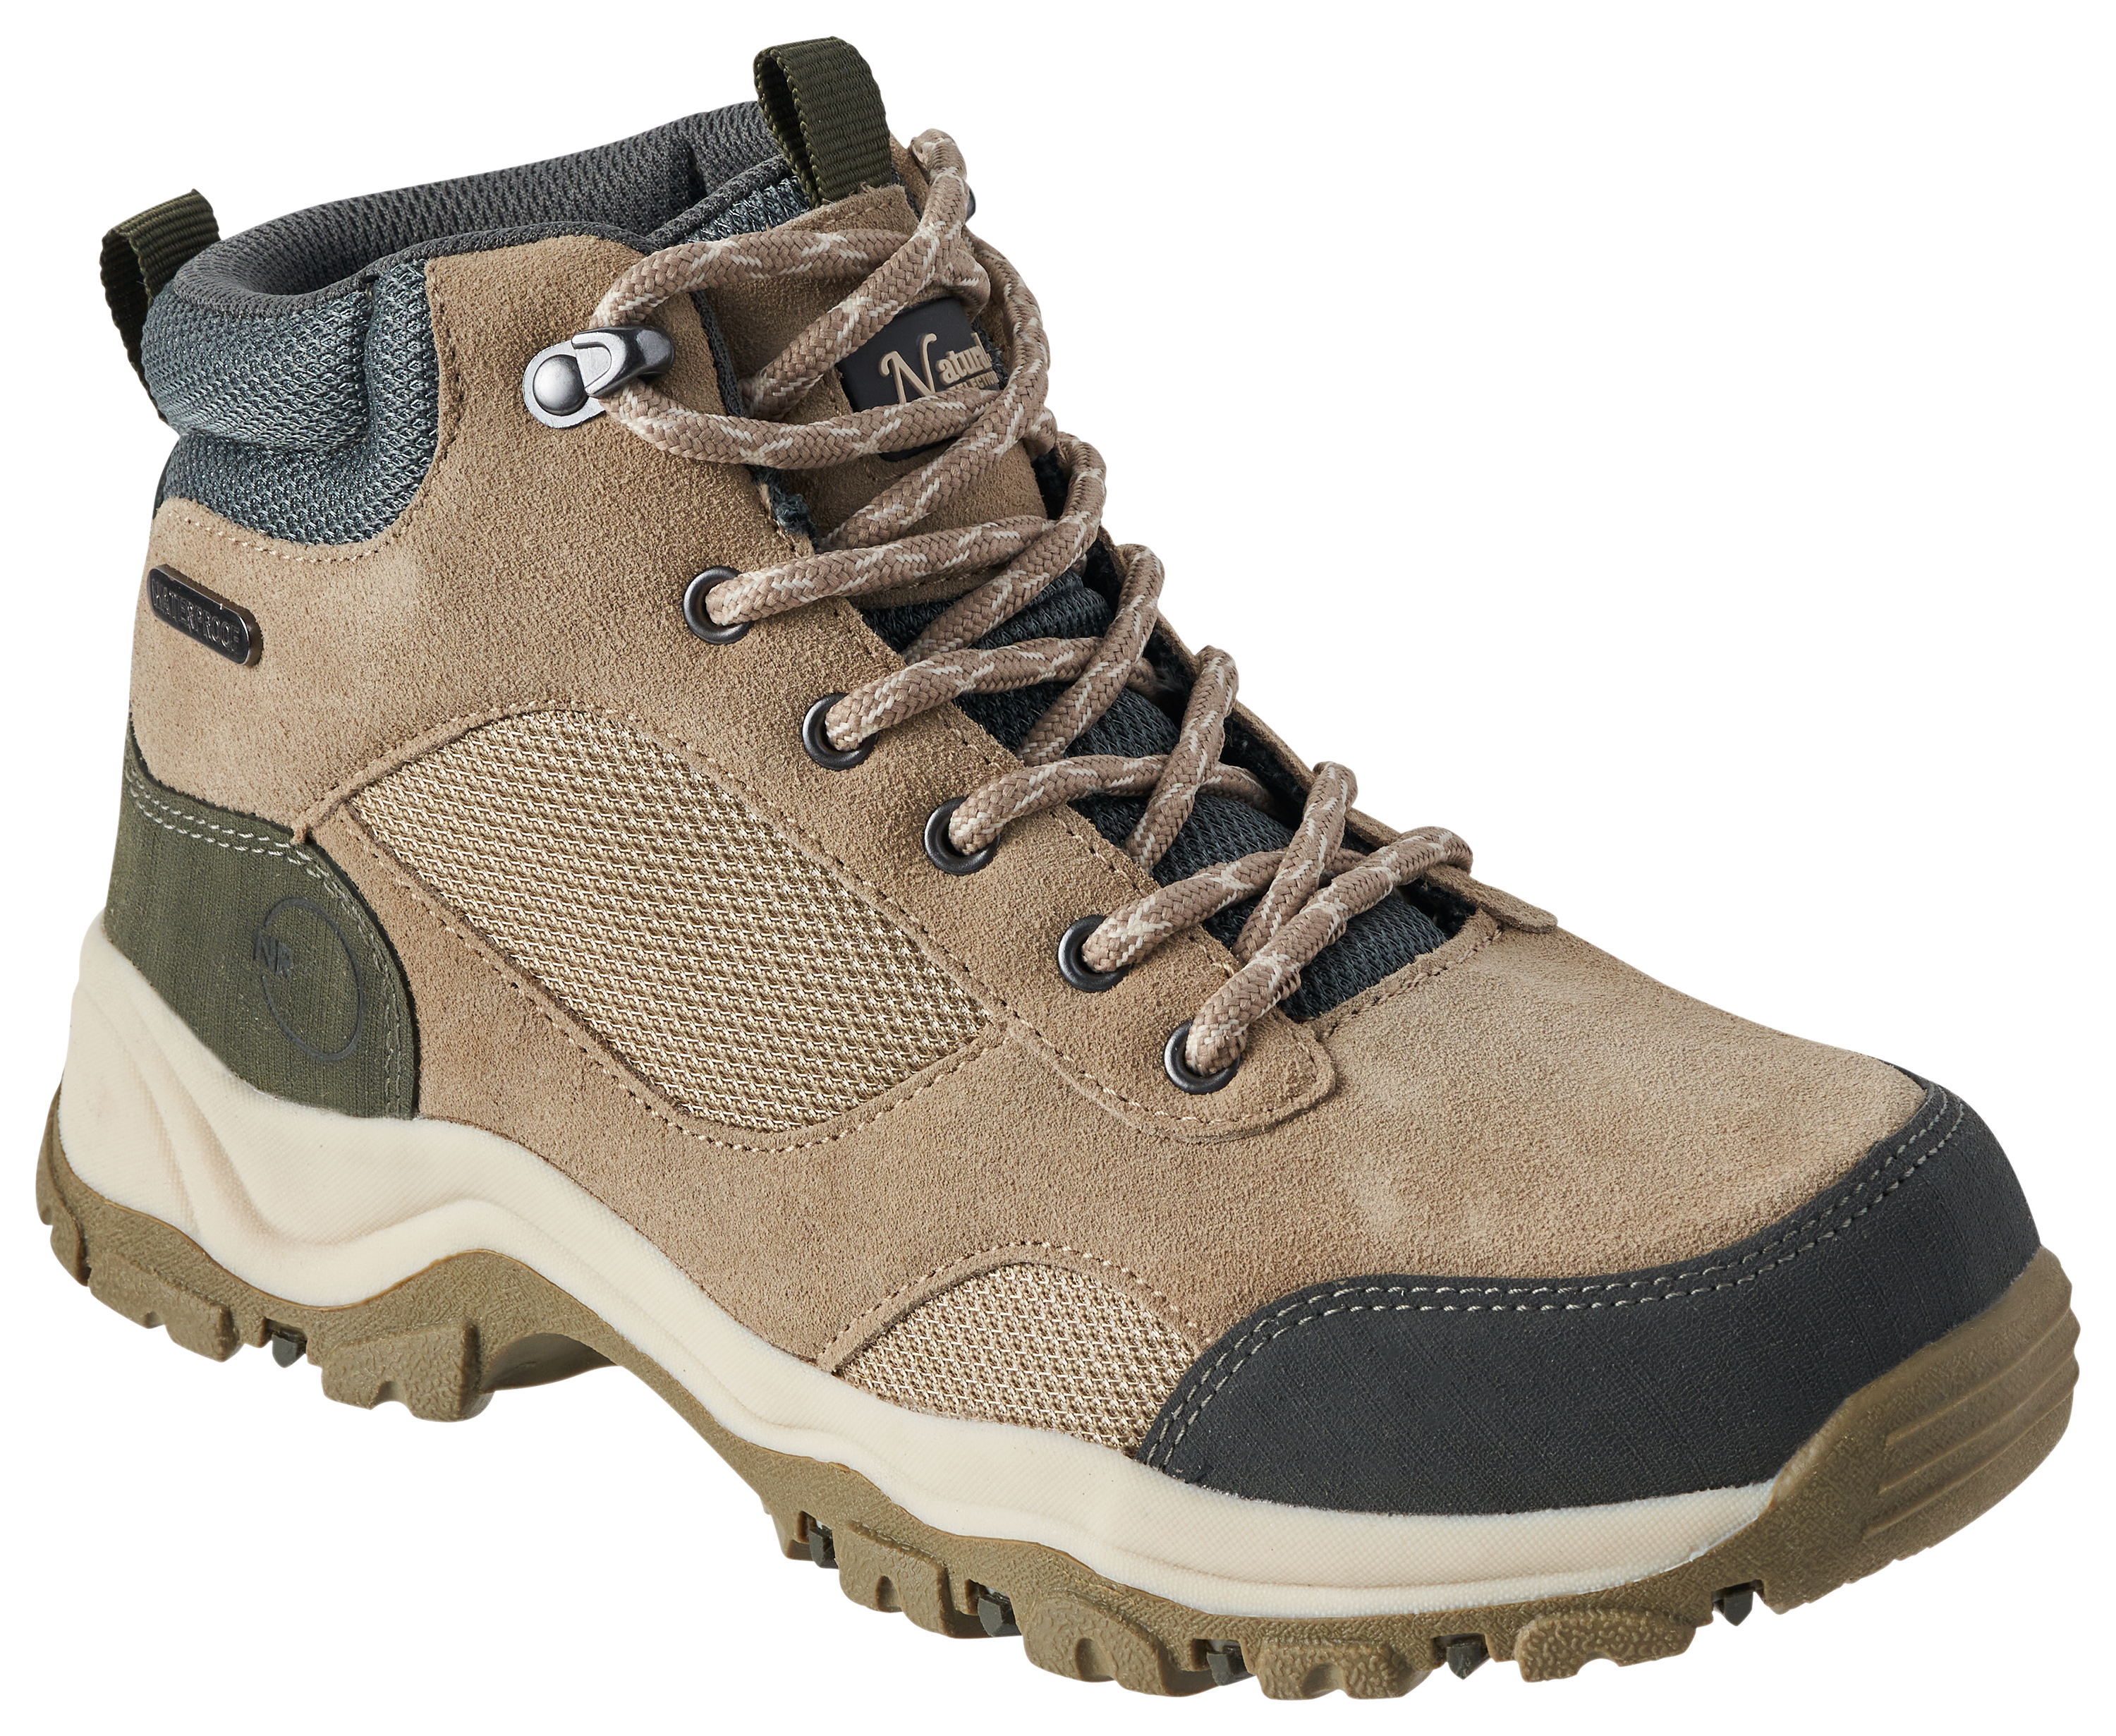 Natural Reflections Skyline II Mid Waterproof Hiking Boots for Ladies - Tan/Charcoal - 8.5M